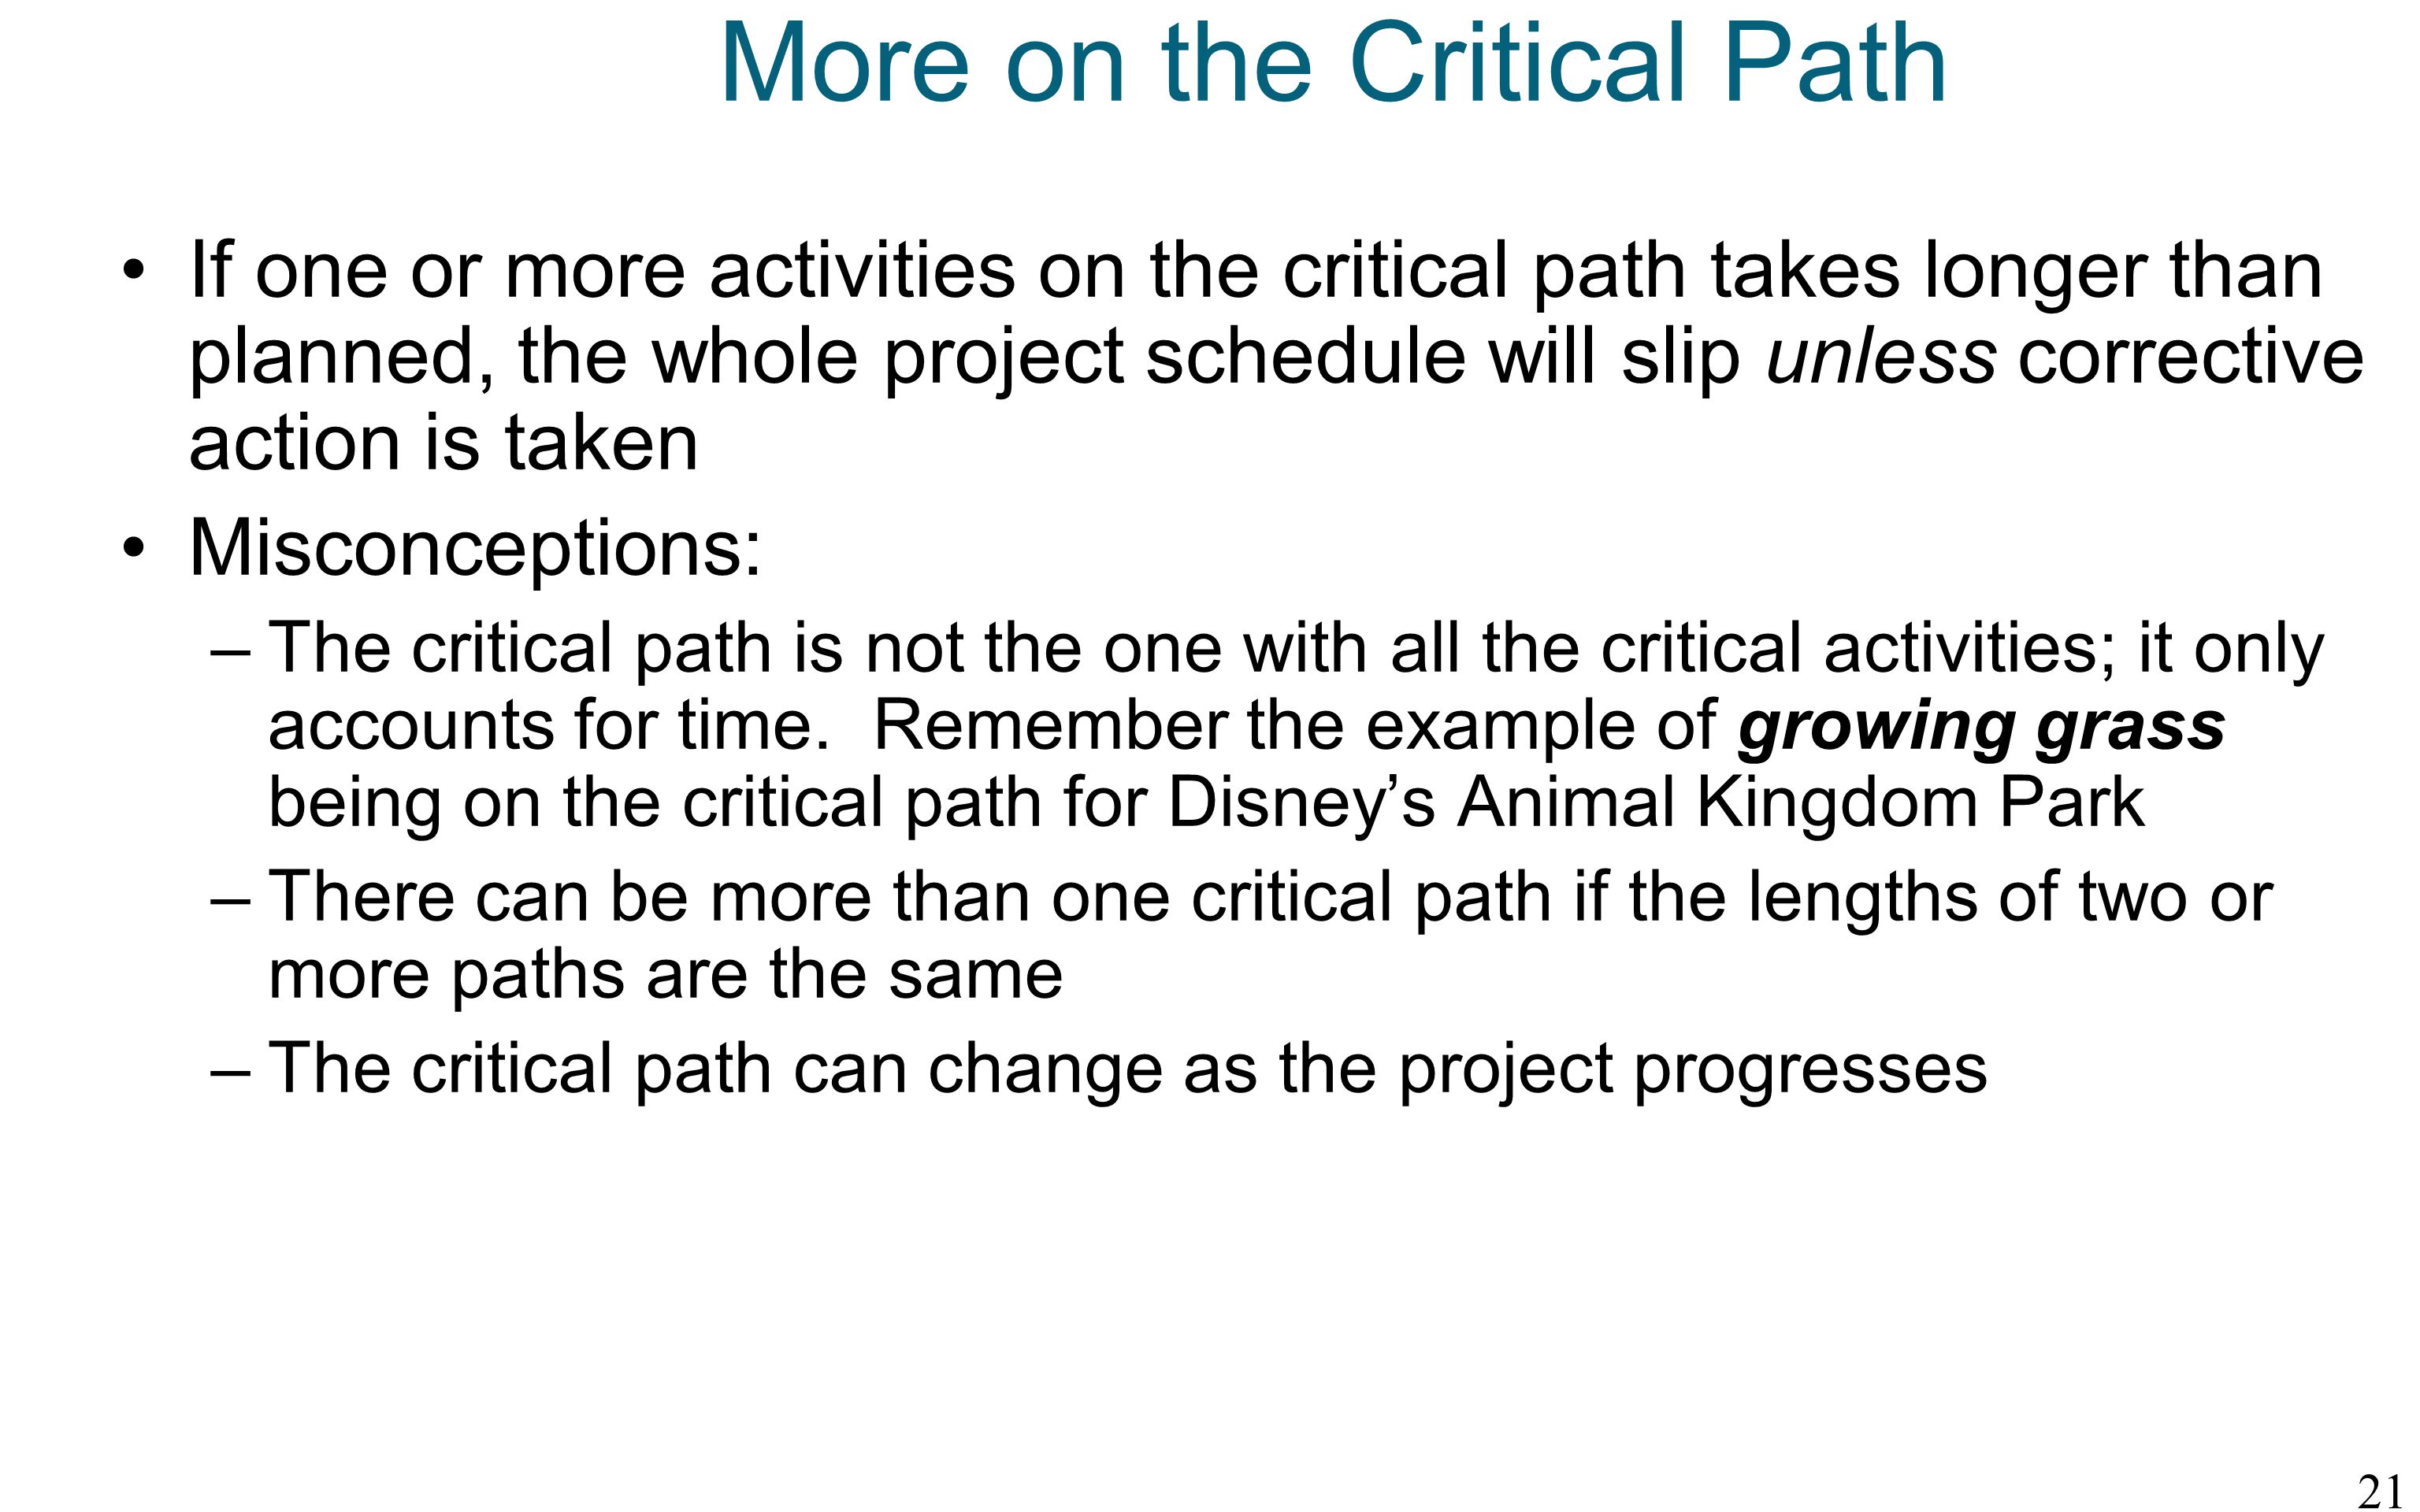 More on the Critical Path